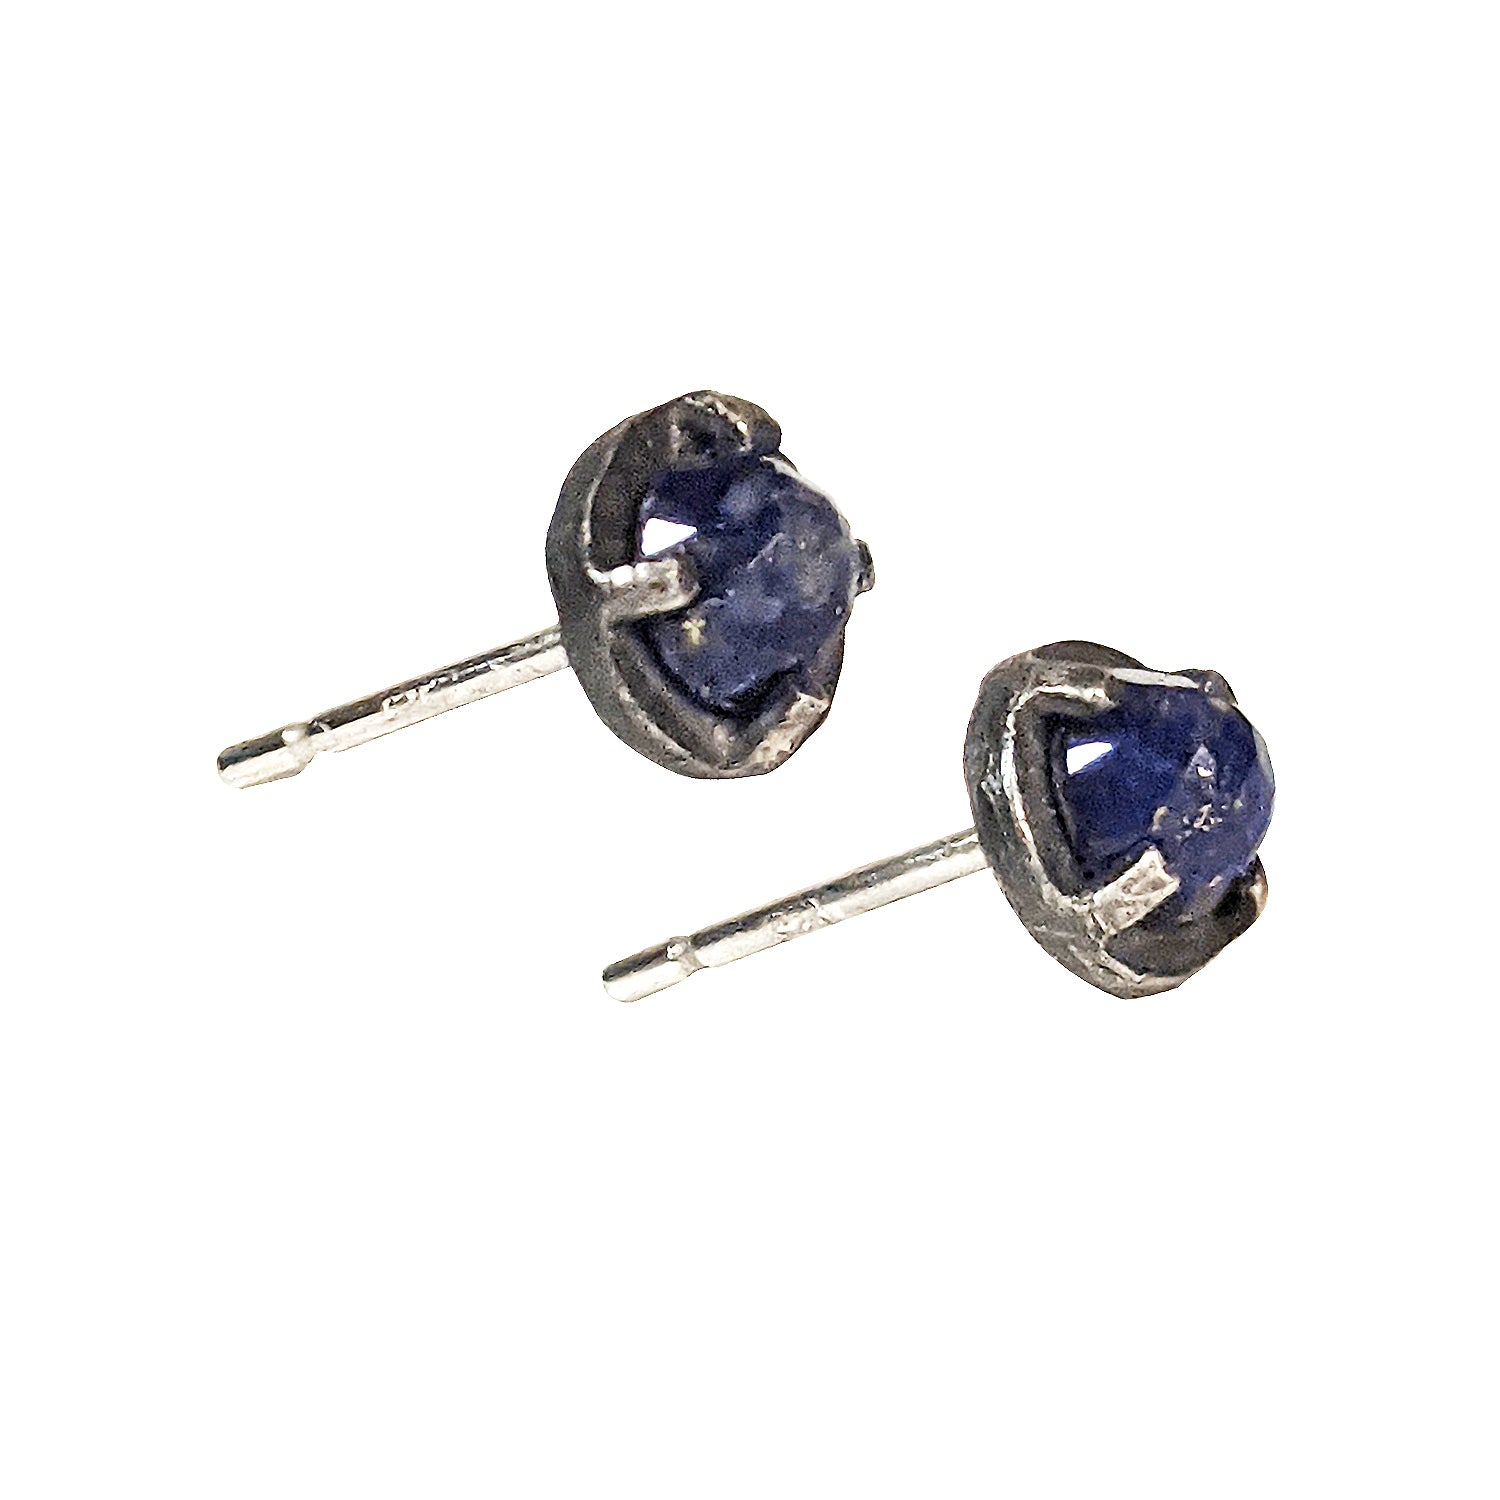 NEW! Carved 4mm Lapis Earrings by Heather Guidero